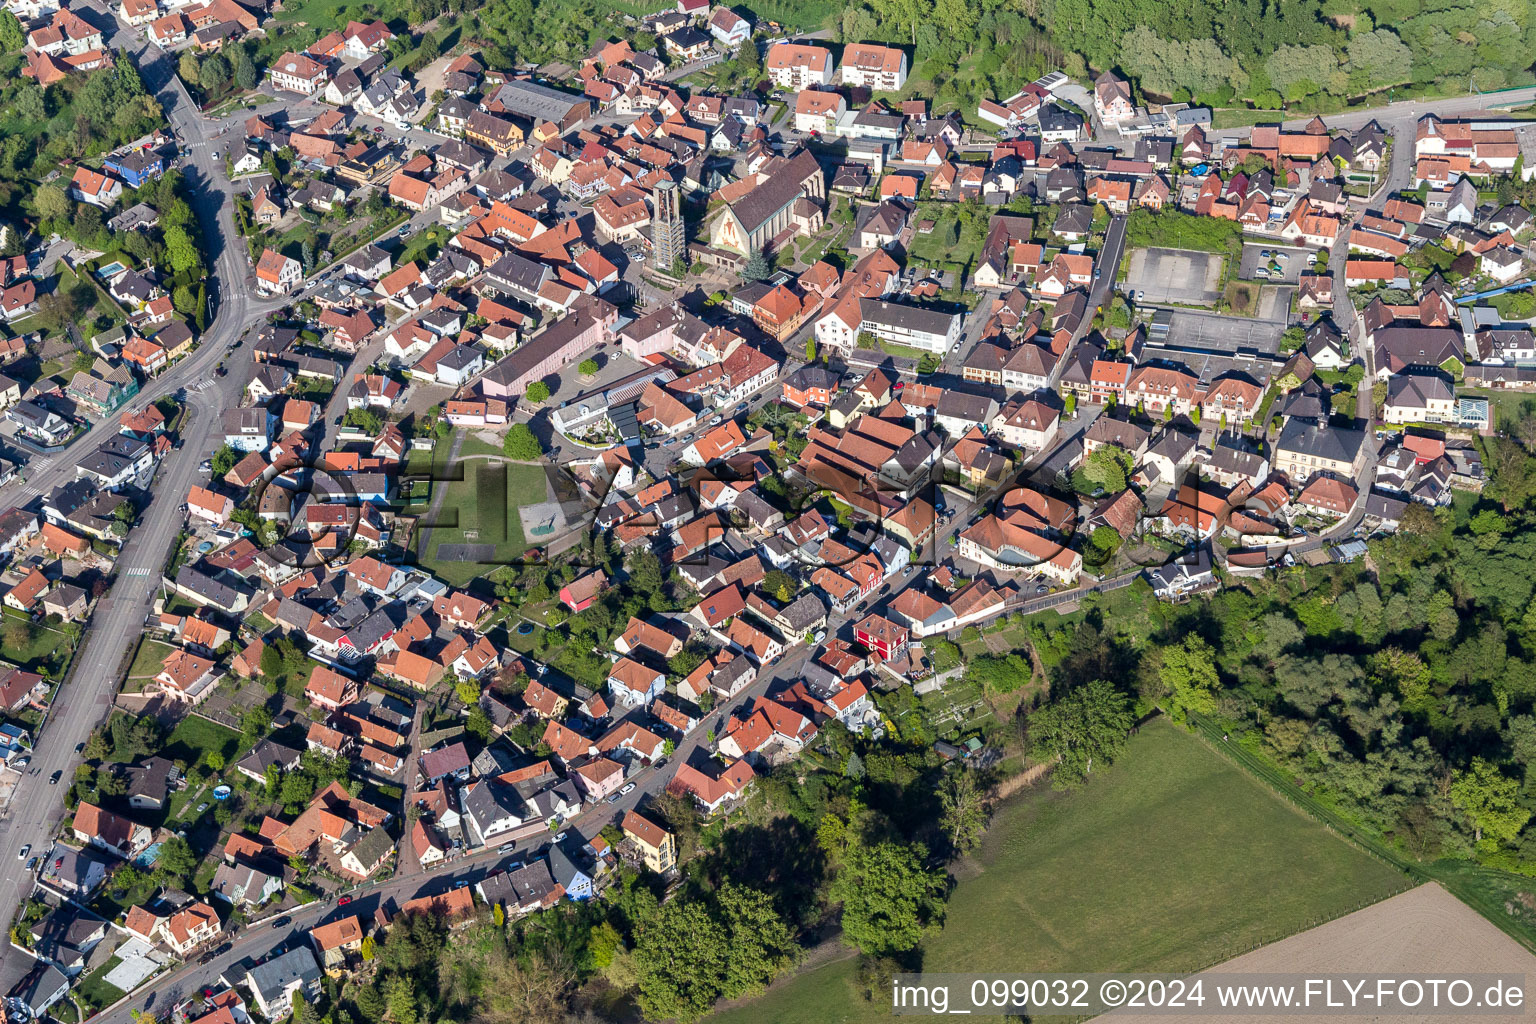 Town View of the streets and houses of the residential areas in Seltz in Grand Est, France